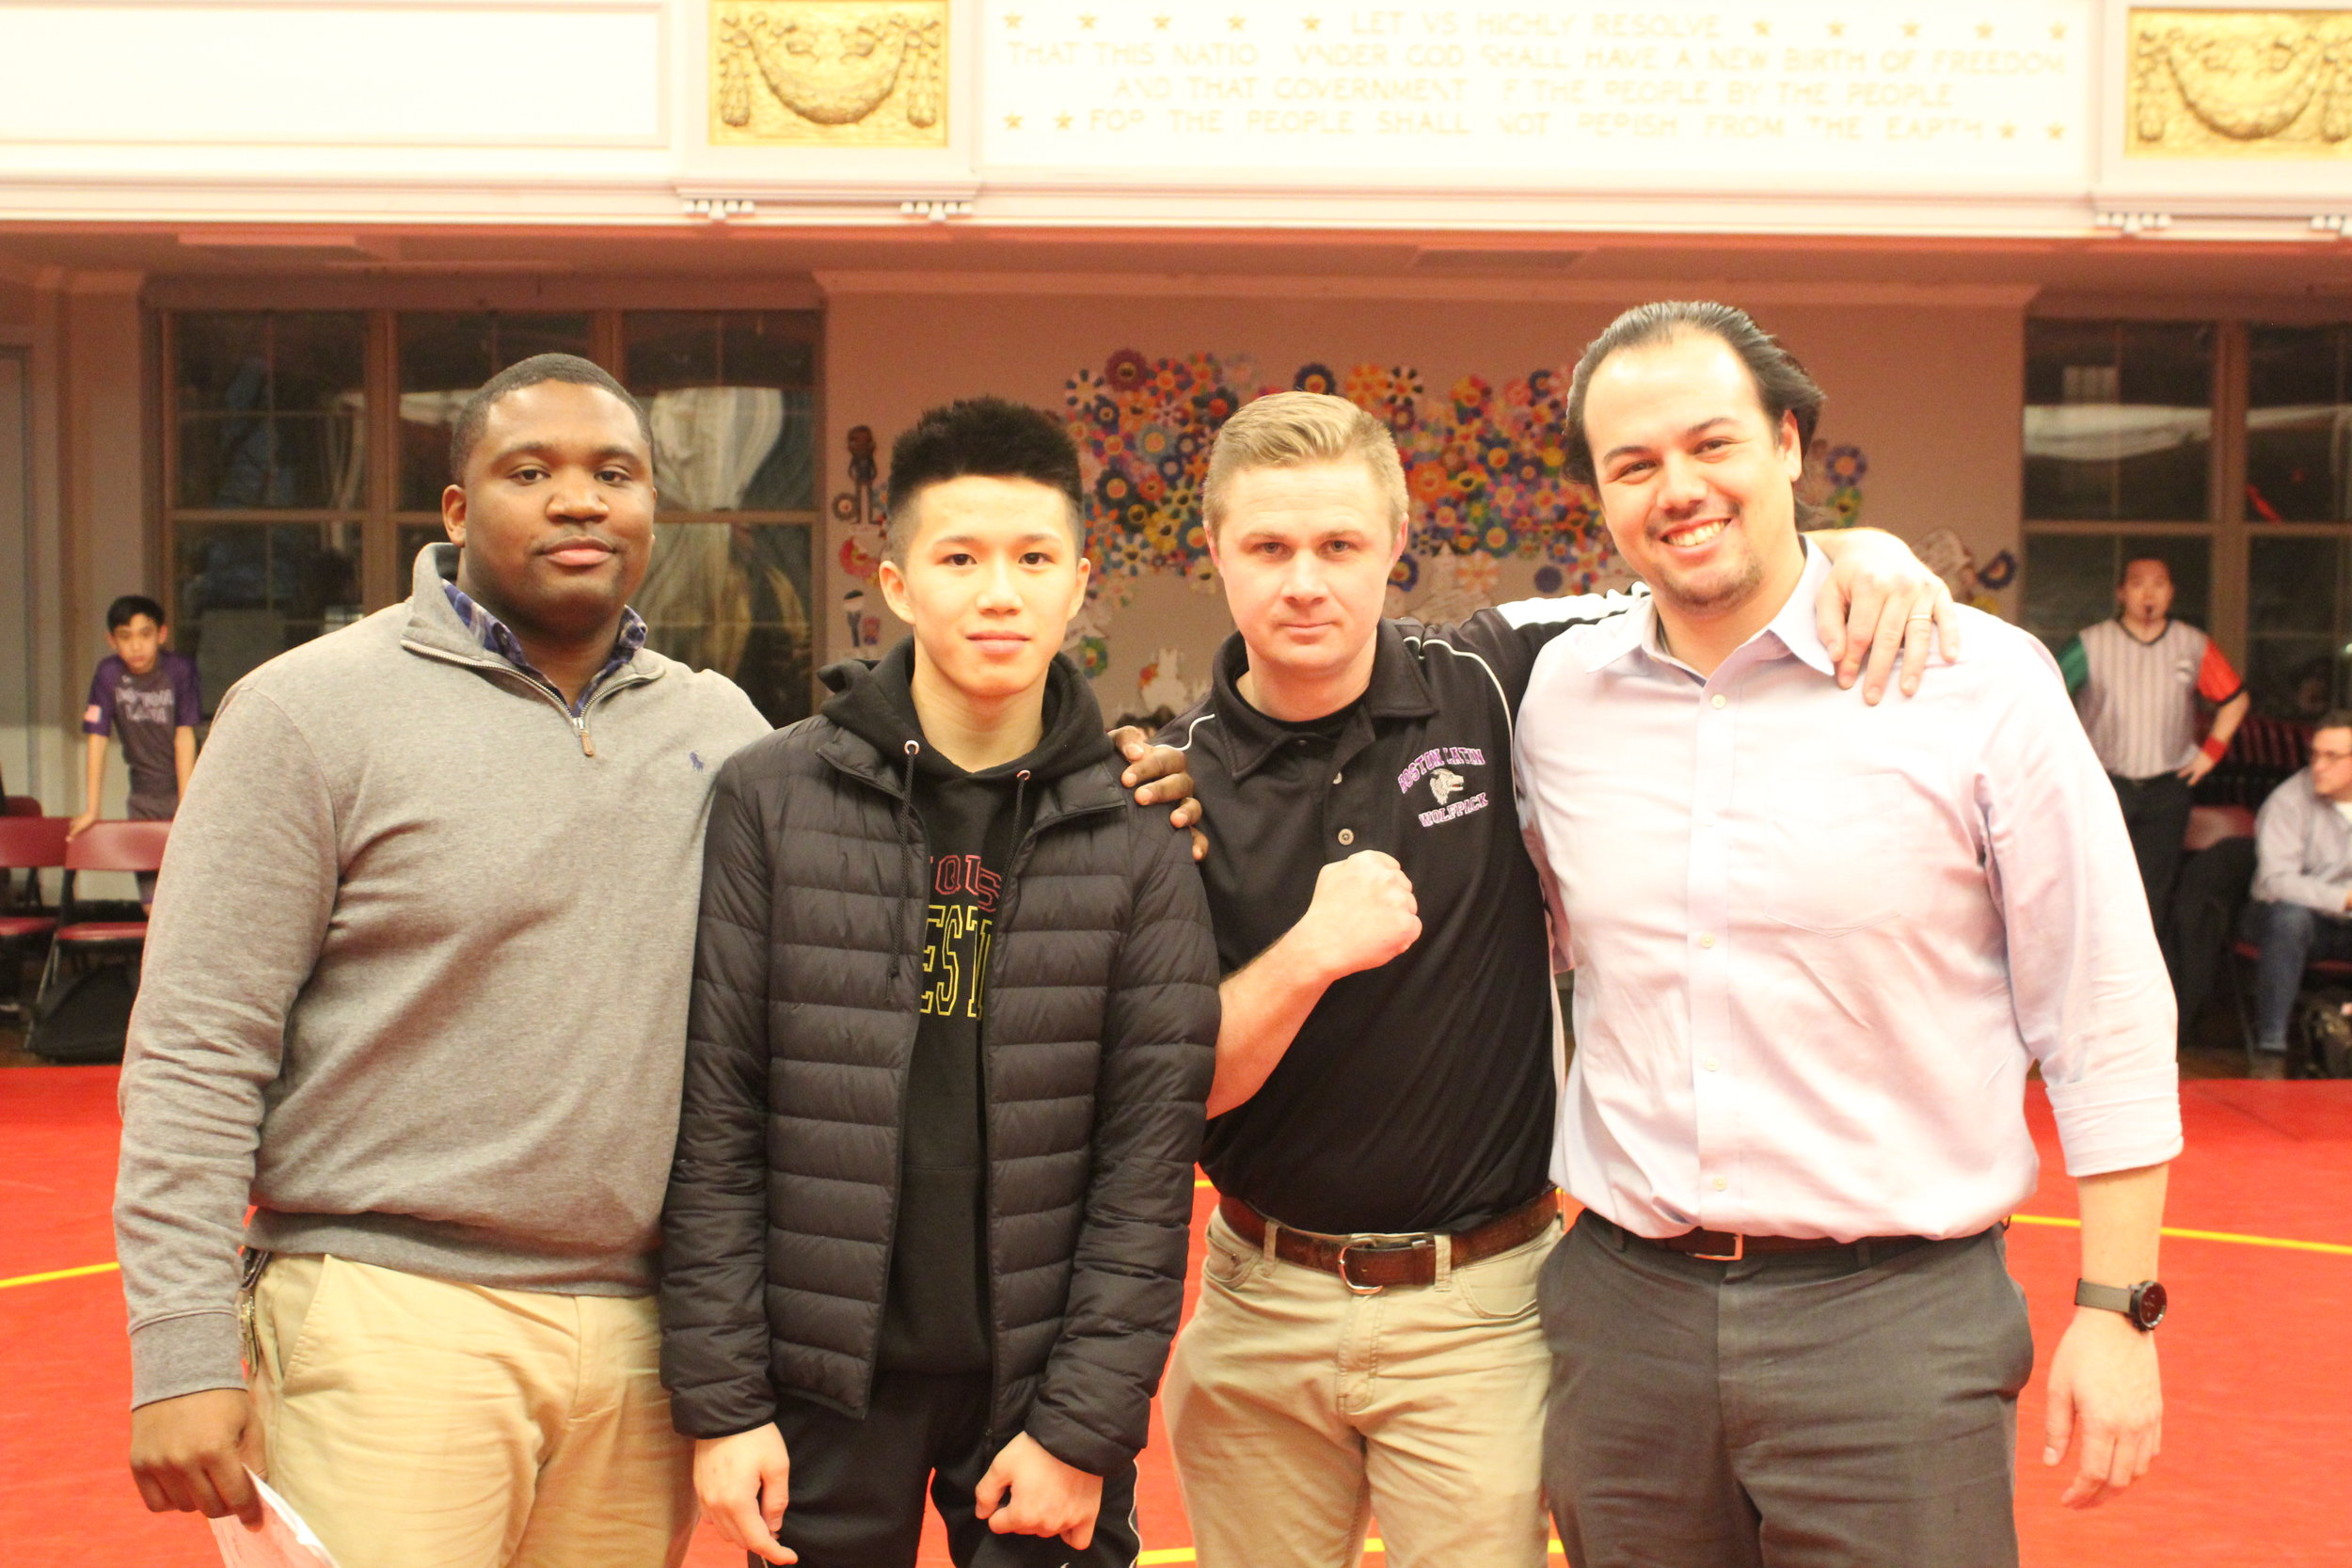 Ricky Sun was awarded the “True Grit Award” given annually to the wrestler who displays the grit exemplified by Huang Wei Speicher. Pictured with Ricky are Coach McKoy (JQUS), Coach Gibbons (BLS), and Josh Speicher.